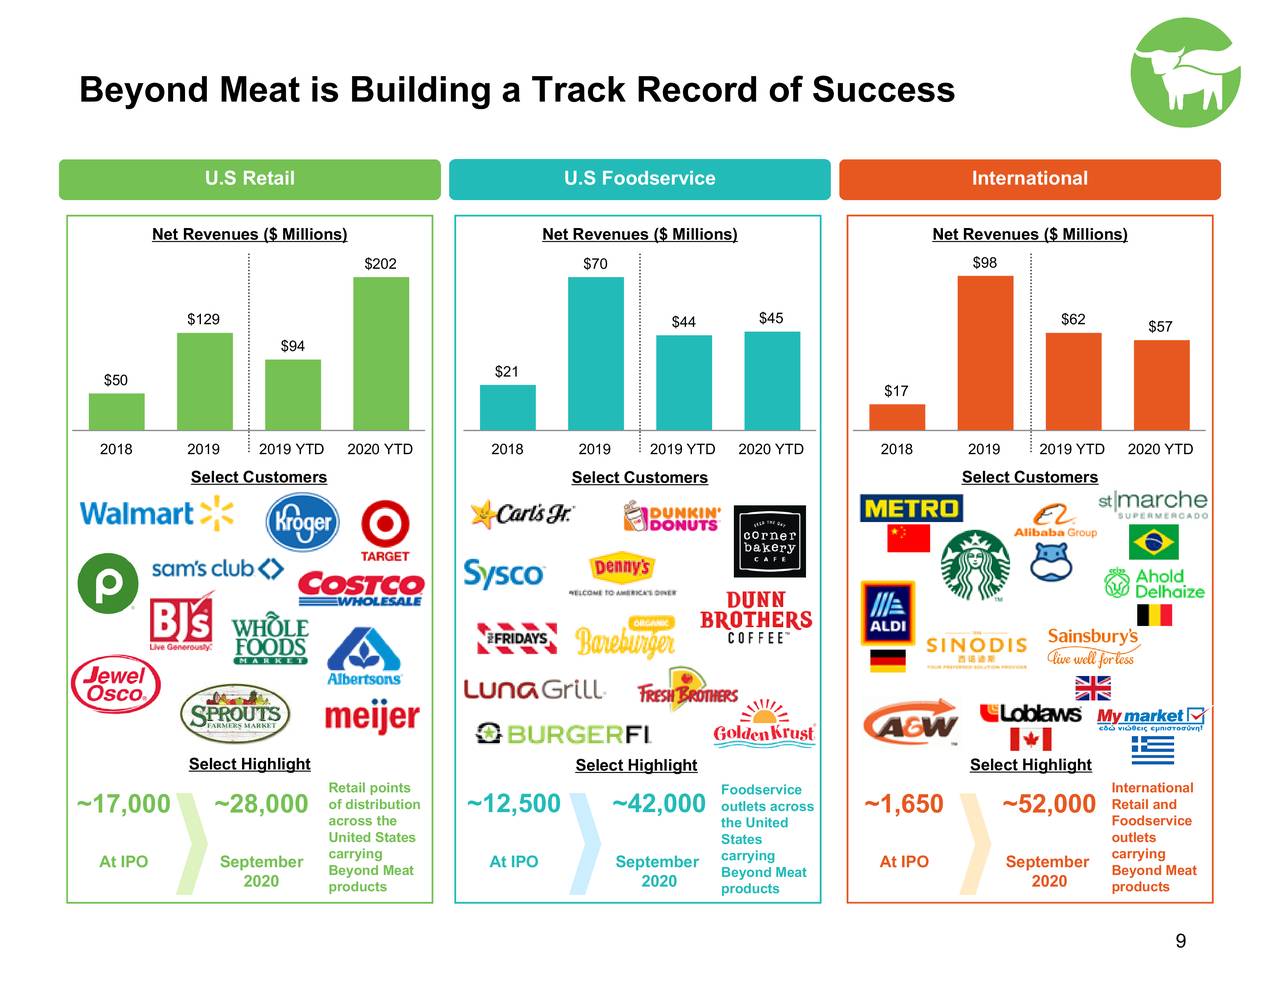 Beyond Meat, Inc. 2020 Q3 Results Earnings Call Presentation